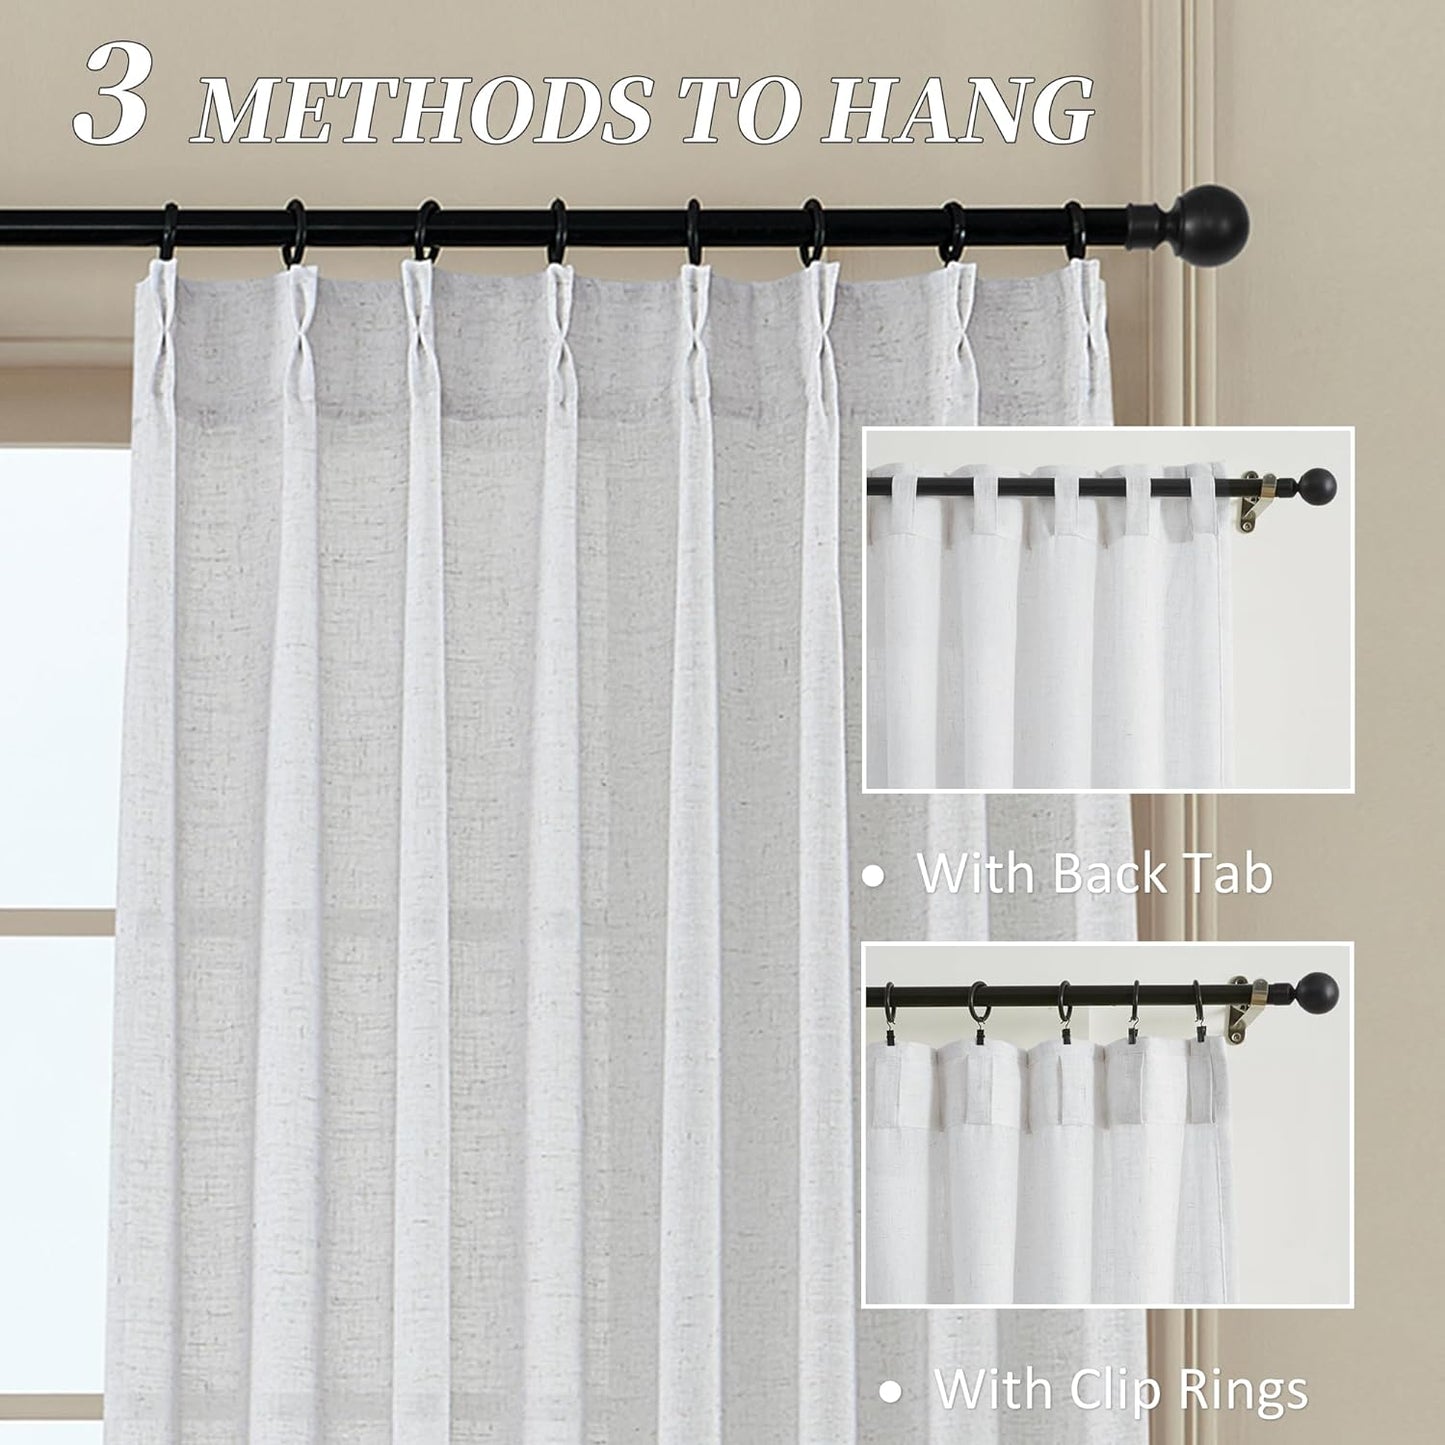 MASWOND White Pinch Pleated Curtains 90 Inches Long 2 Panels for Living Room Semi Sheer Linen Curtains Pinch Pleat Drapes for Traverse Rod Light Filtering Curtains for Dining Bedroom W38Xl90 Length  MASWOND   